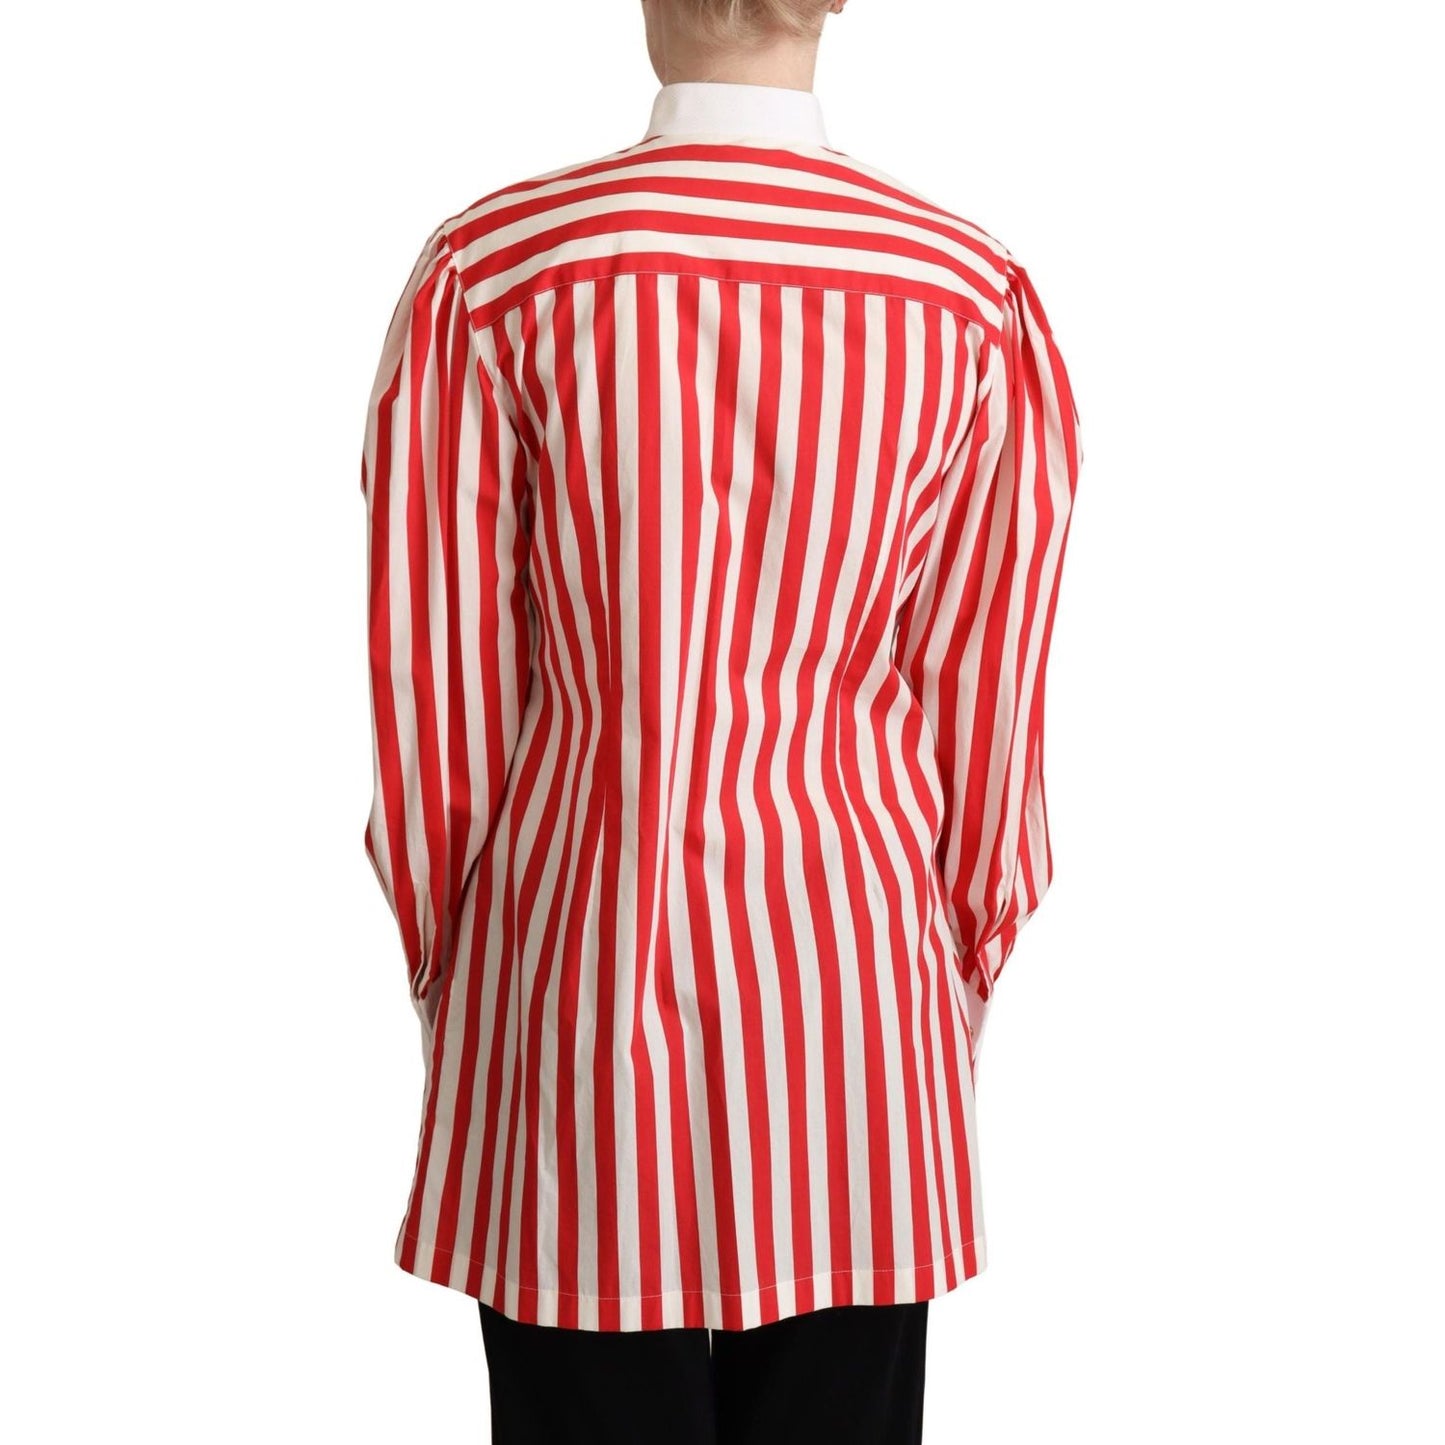 Dolce & Gabbana Elegant Red and White Stripe Cotton Polo Top red-white-striped-long-sleeves-formal-shirt